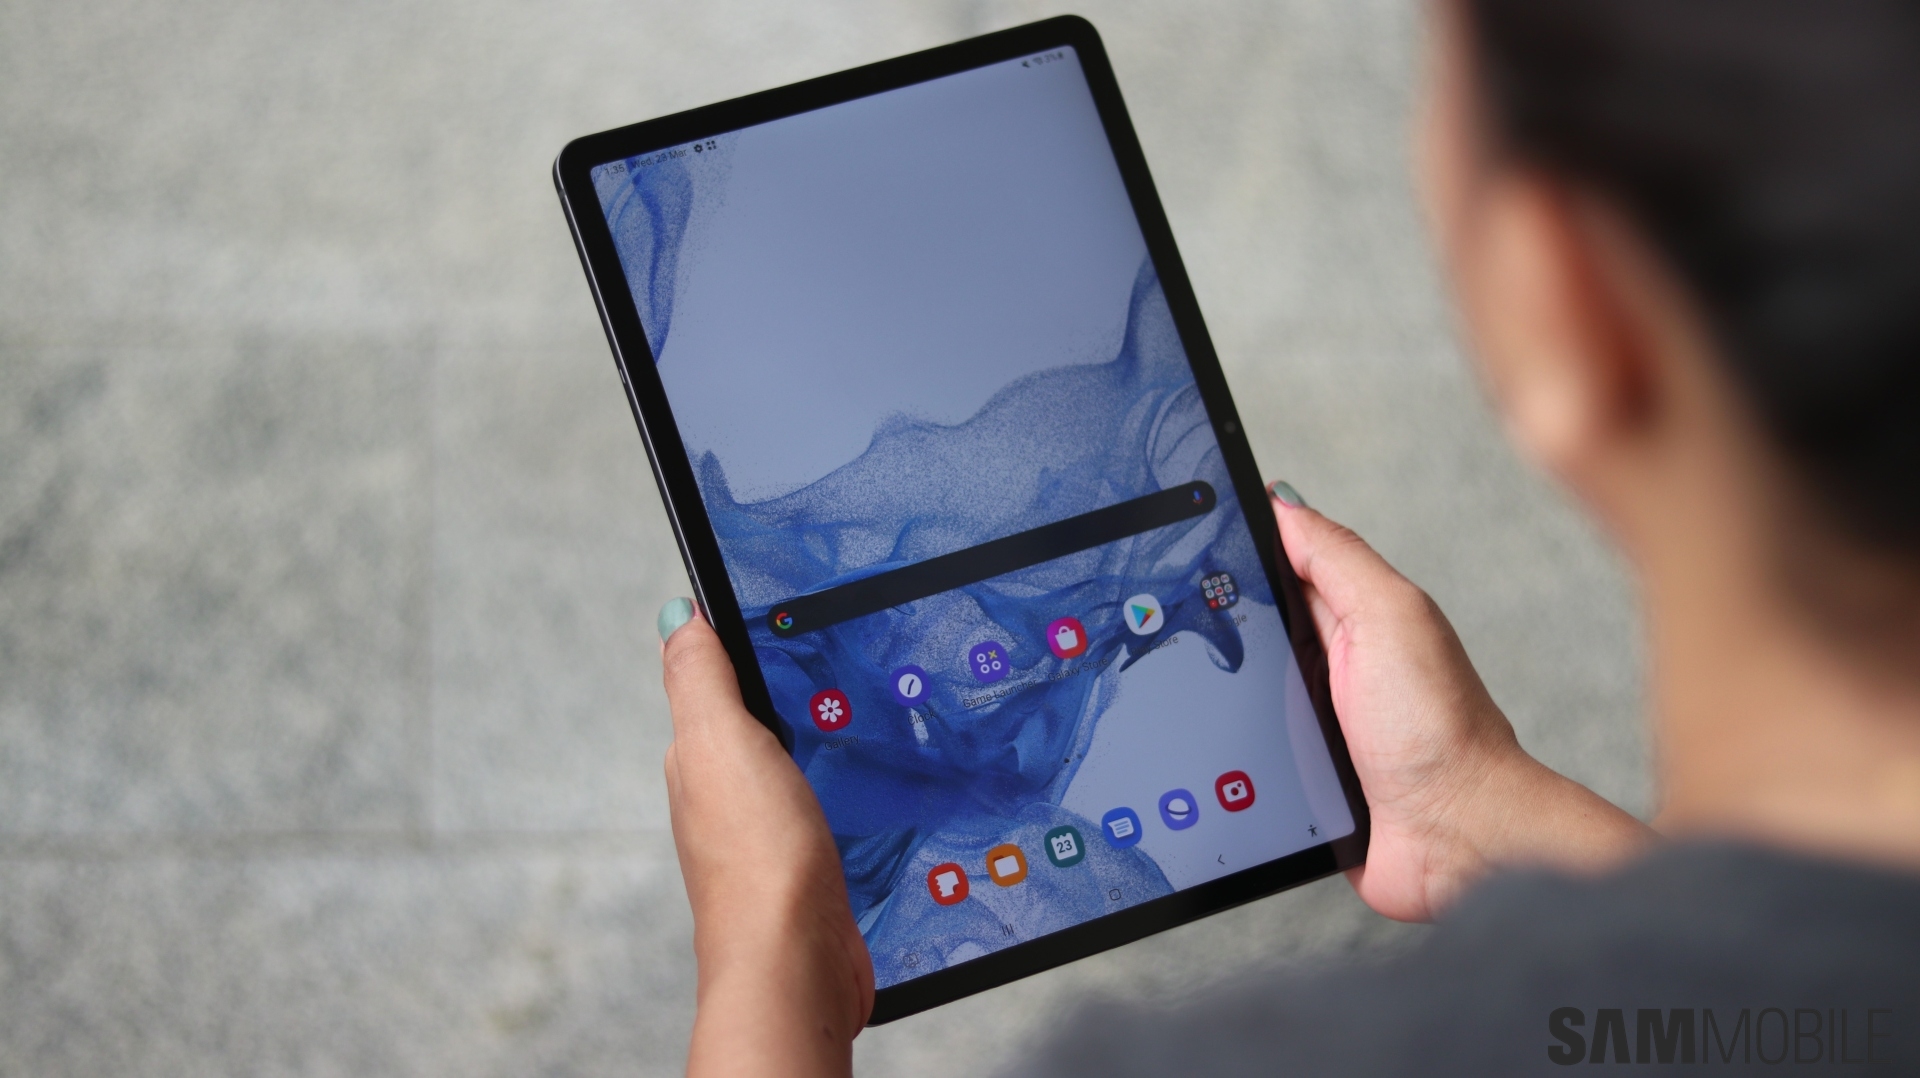 Samsung Galaxy Tab S8 series gets stable Android 13 and One UI 5.0 update -  SamMobile